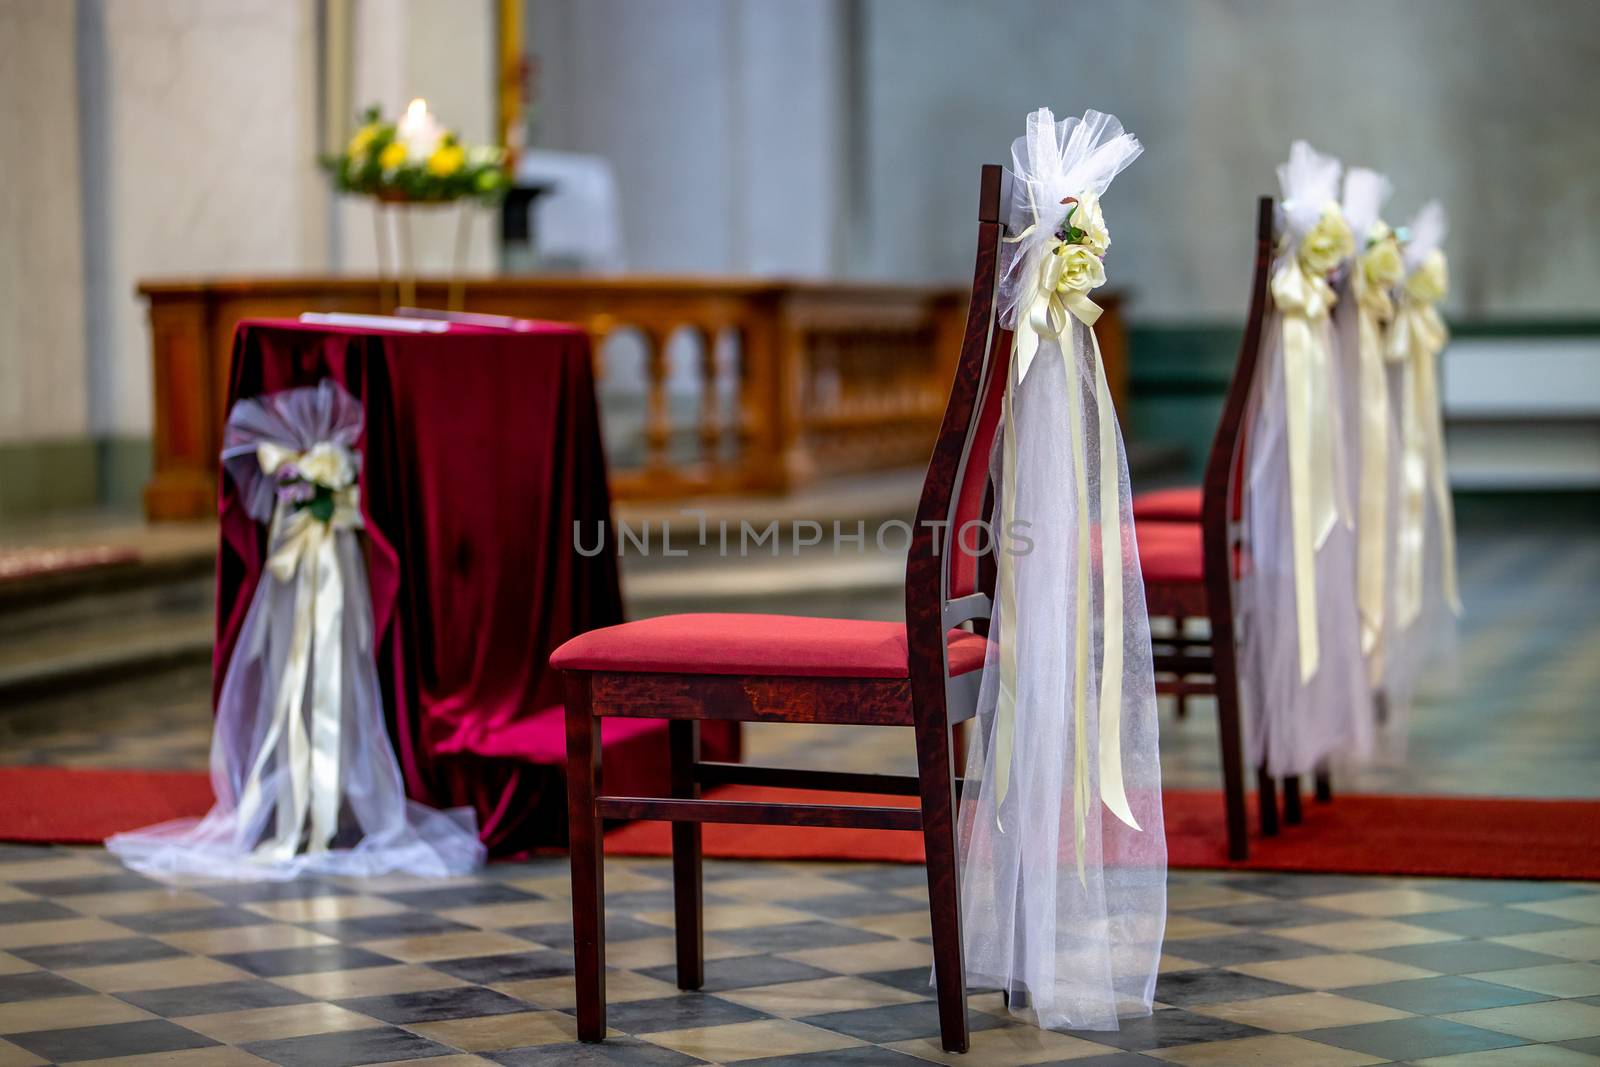 Beautiful floral wedding decoration in a church. Christian church decoration for wedding marriage ceremony. Wedding decor for chairs from flowers, veils and ribbons in church.